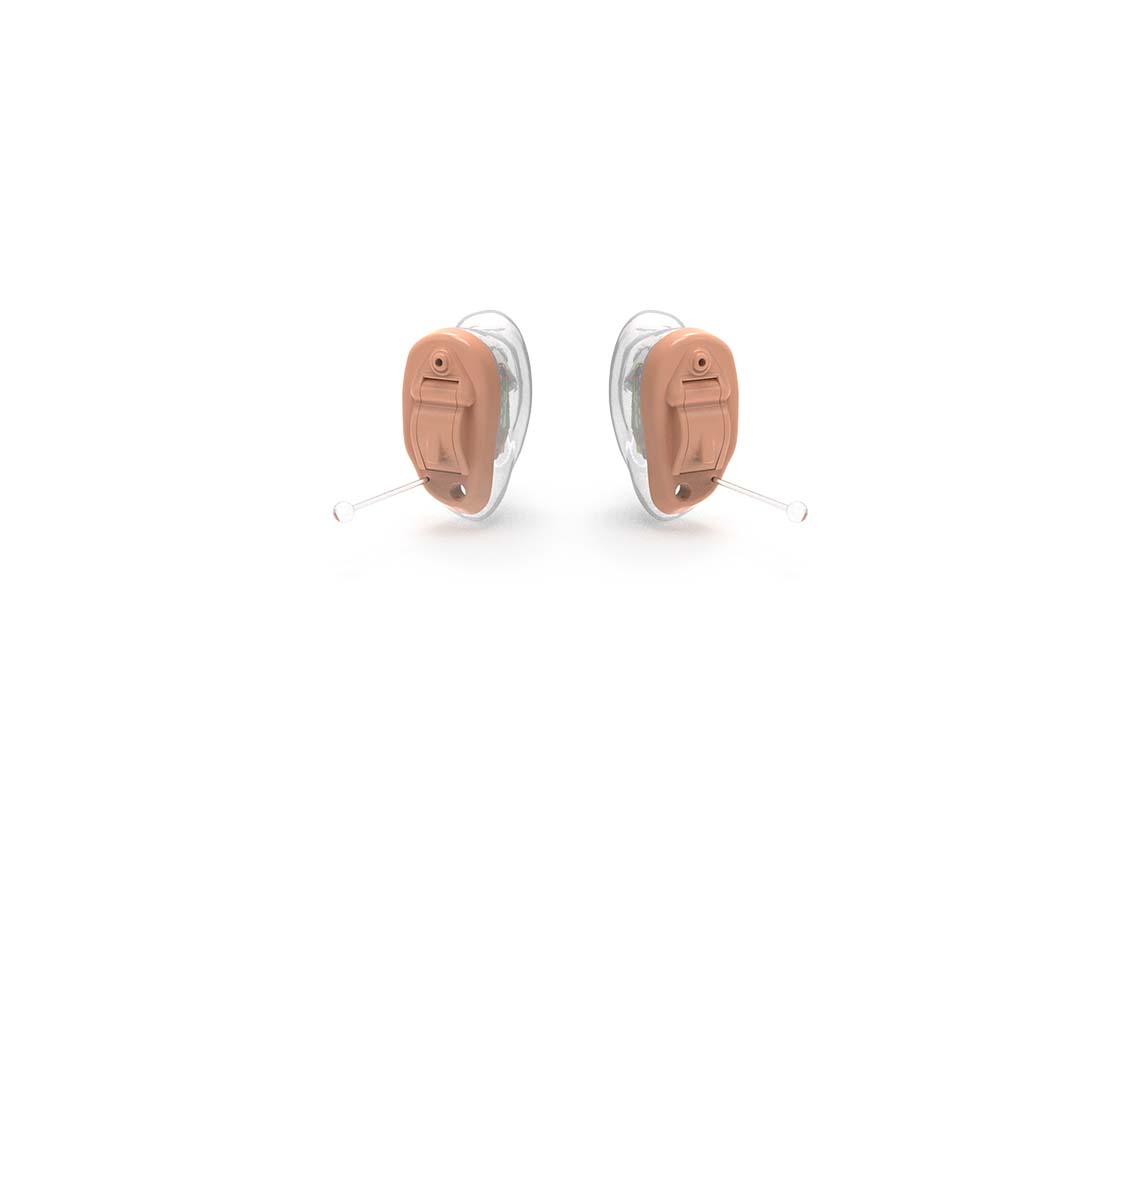 A pair of CIC hearing aids